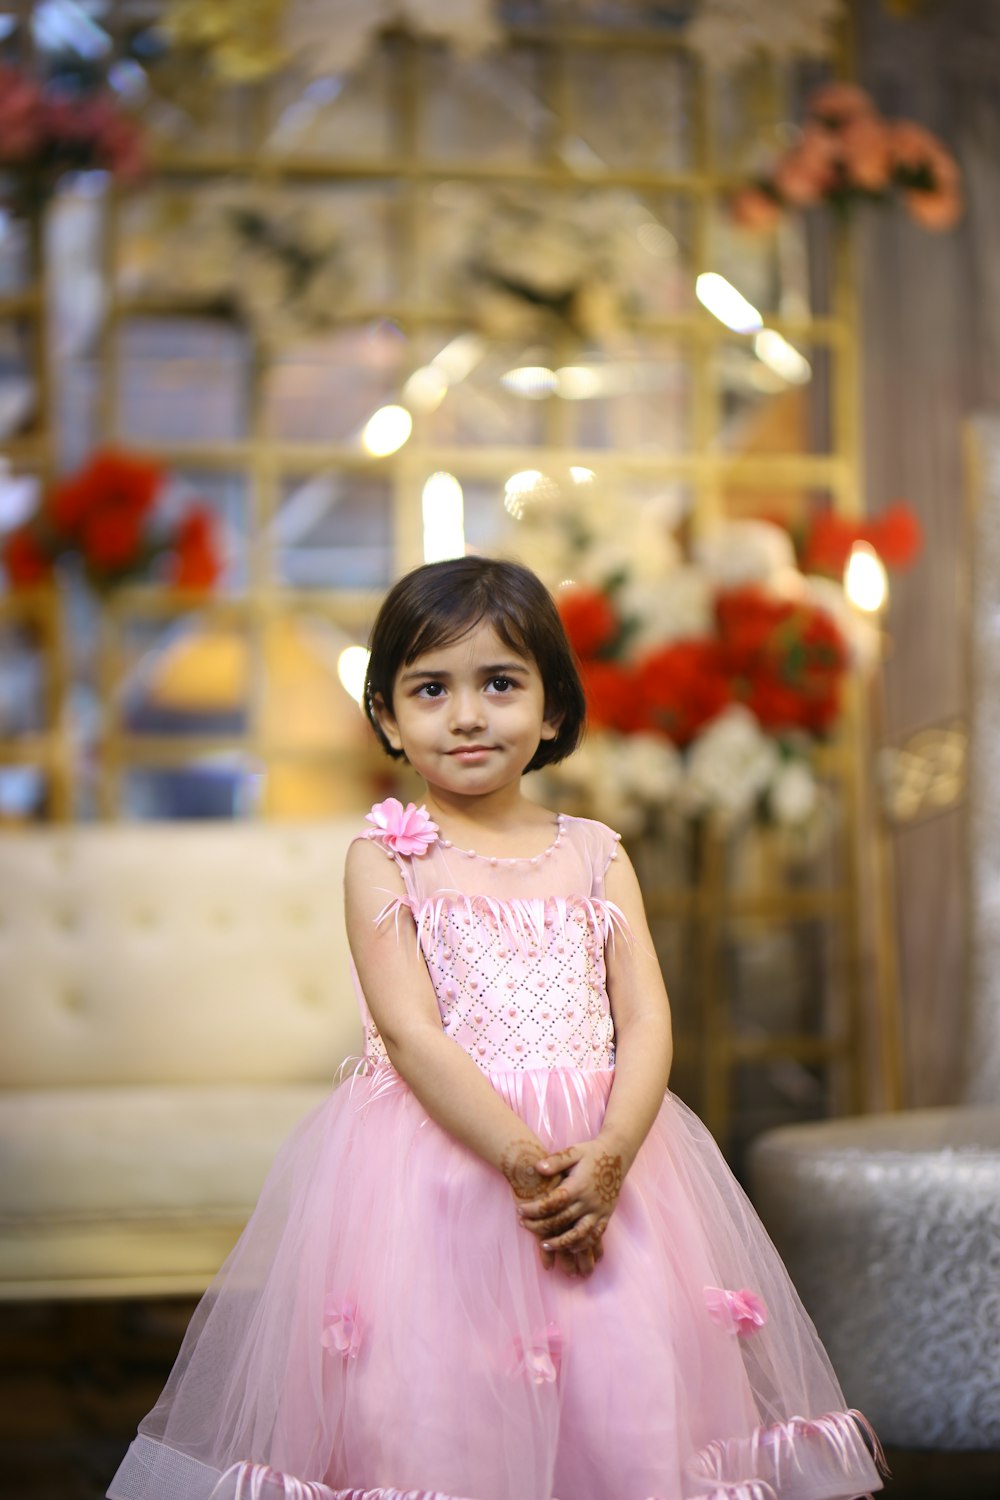 a little girl in a pink dress posing for a picture